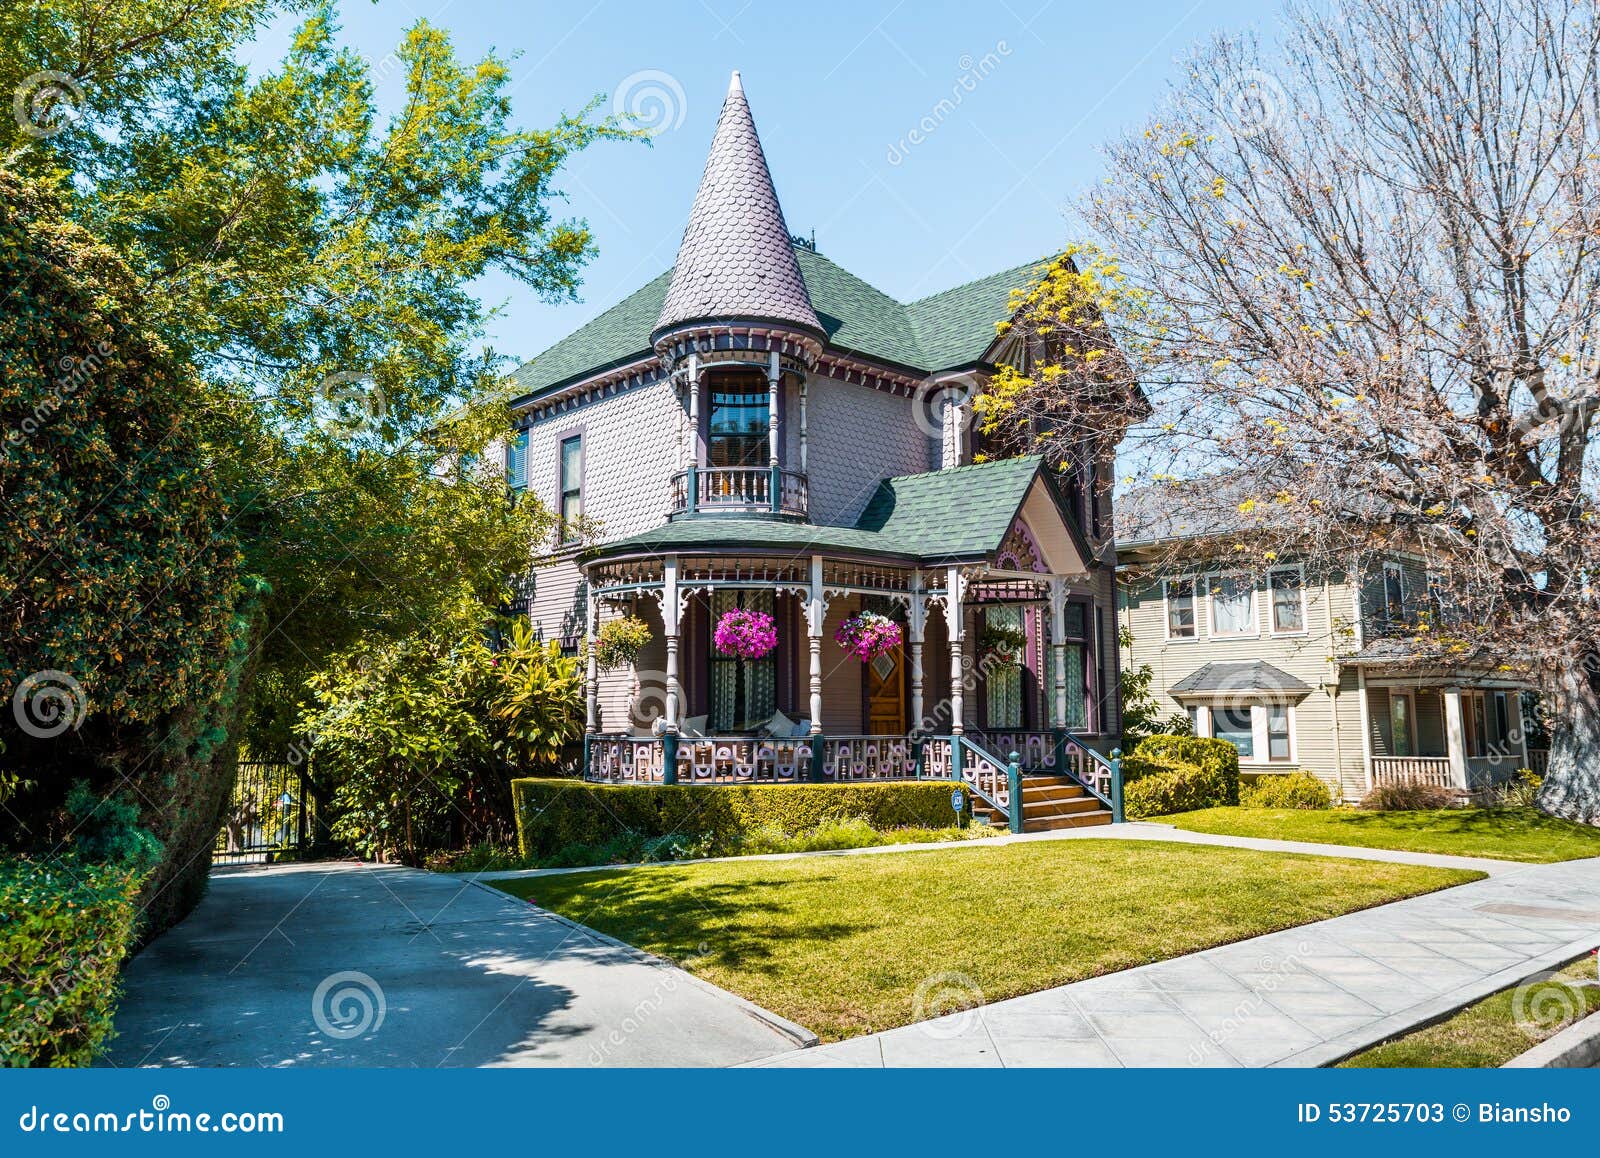 old victorian house